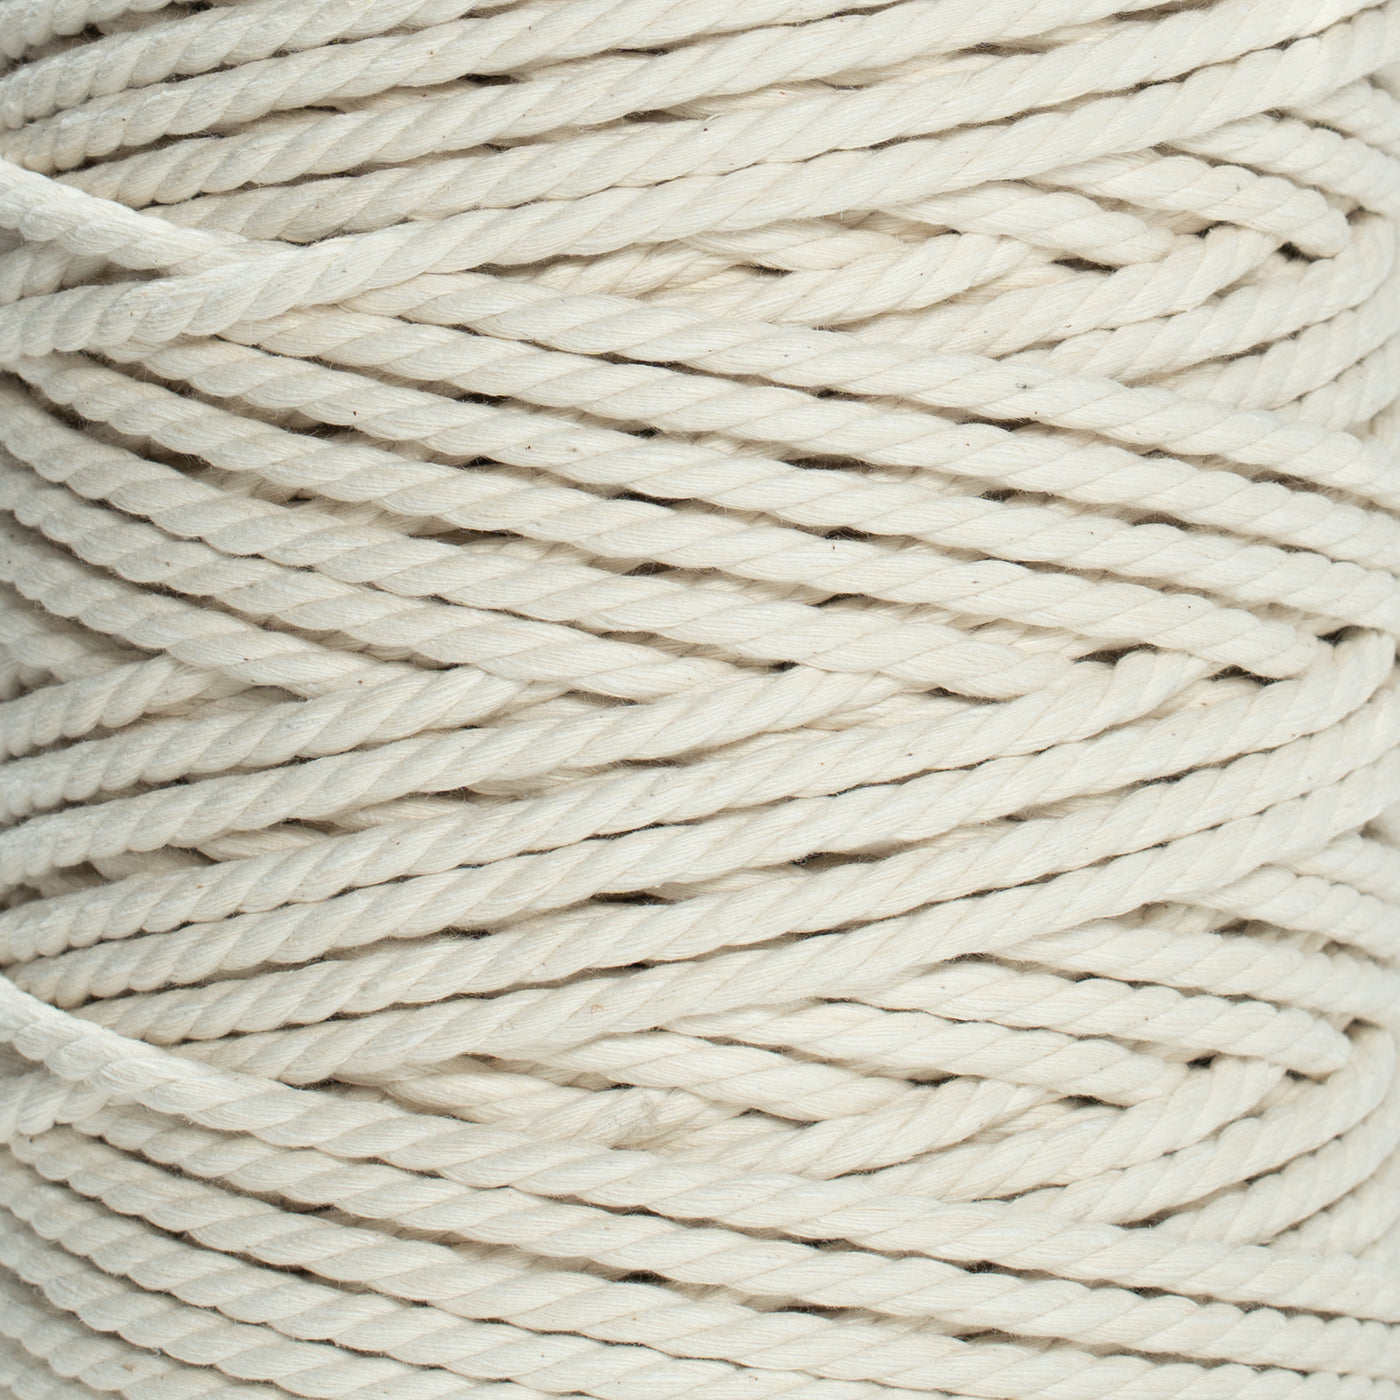 5mm Pure Cotton Macrame Rope - 50m Roll